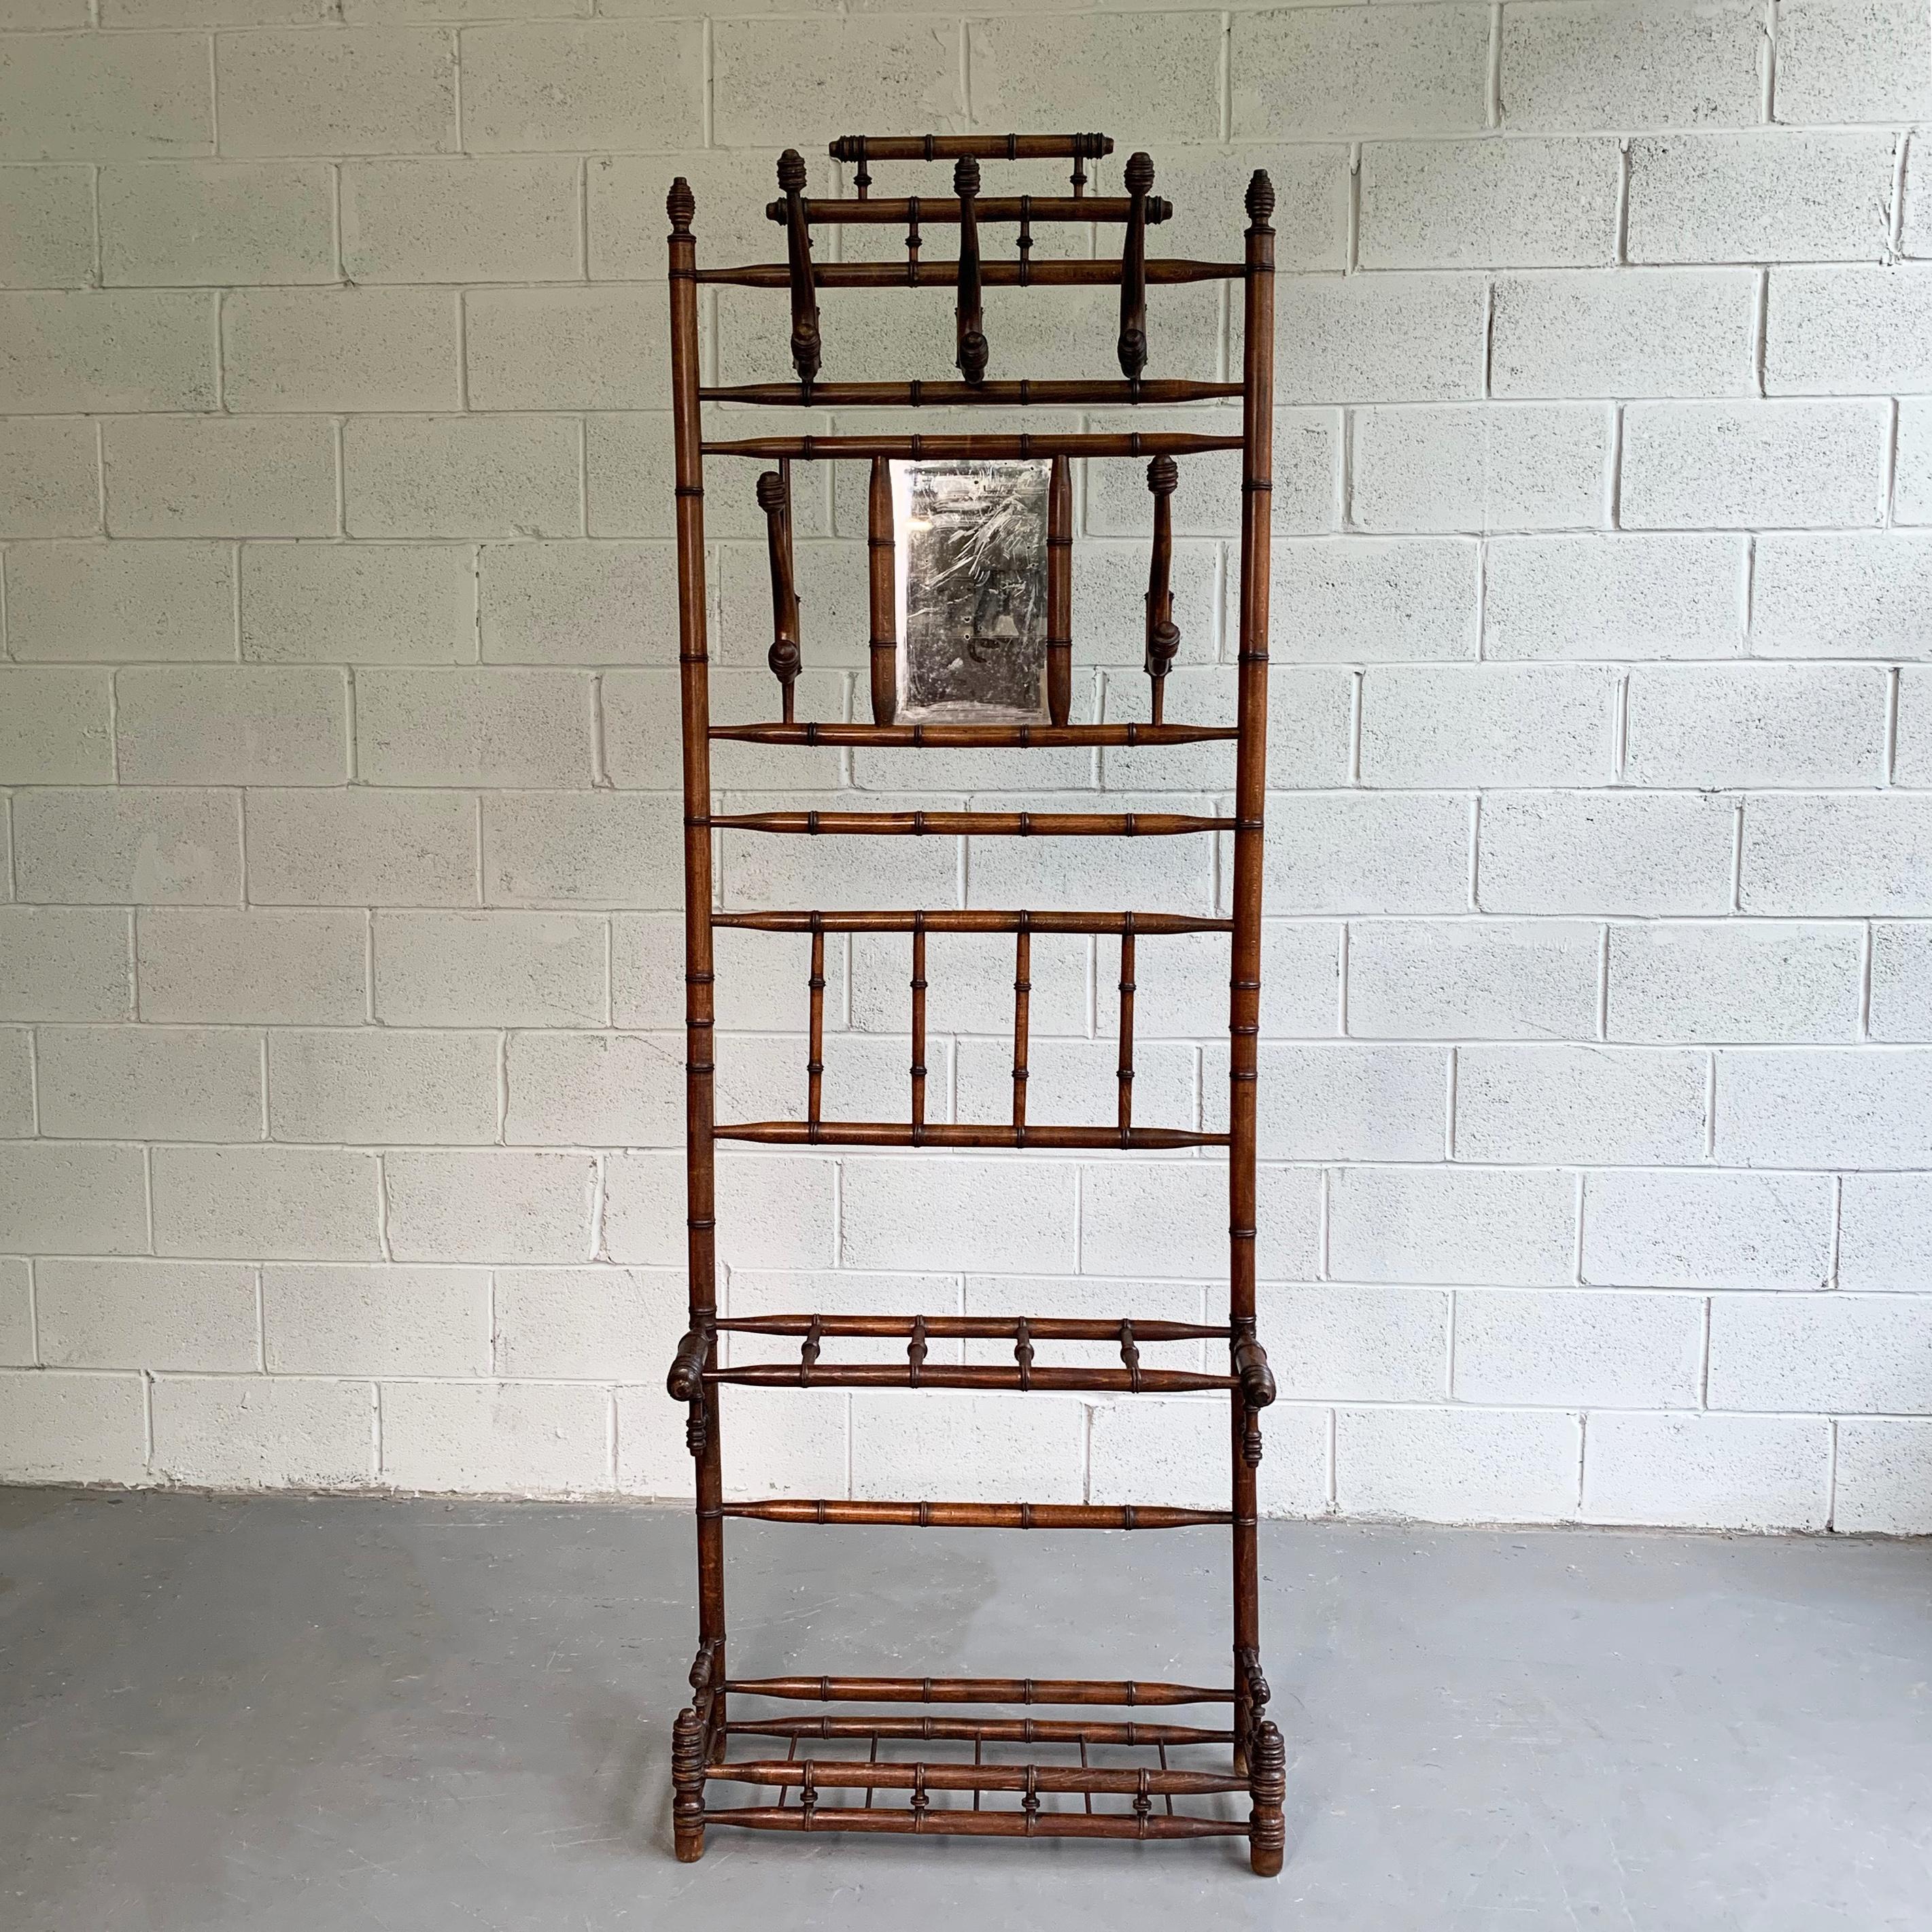 Antique, entryway, hall tree, coat rack features a turned, quarter sawn oak, bamboo motif frame with 5, double, articulating, steam-bentwood hooks, vanity mirror at 53 inches height and slots for umbrellas at 23 inches height.